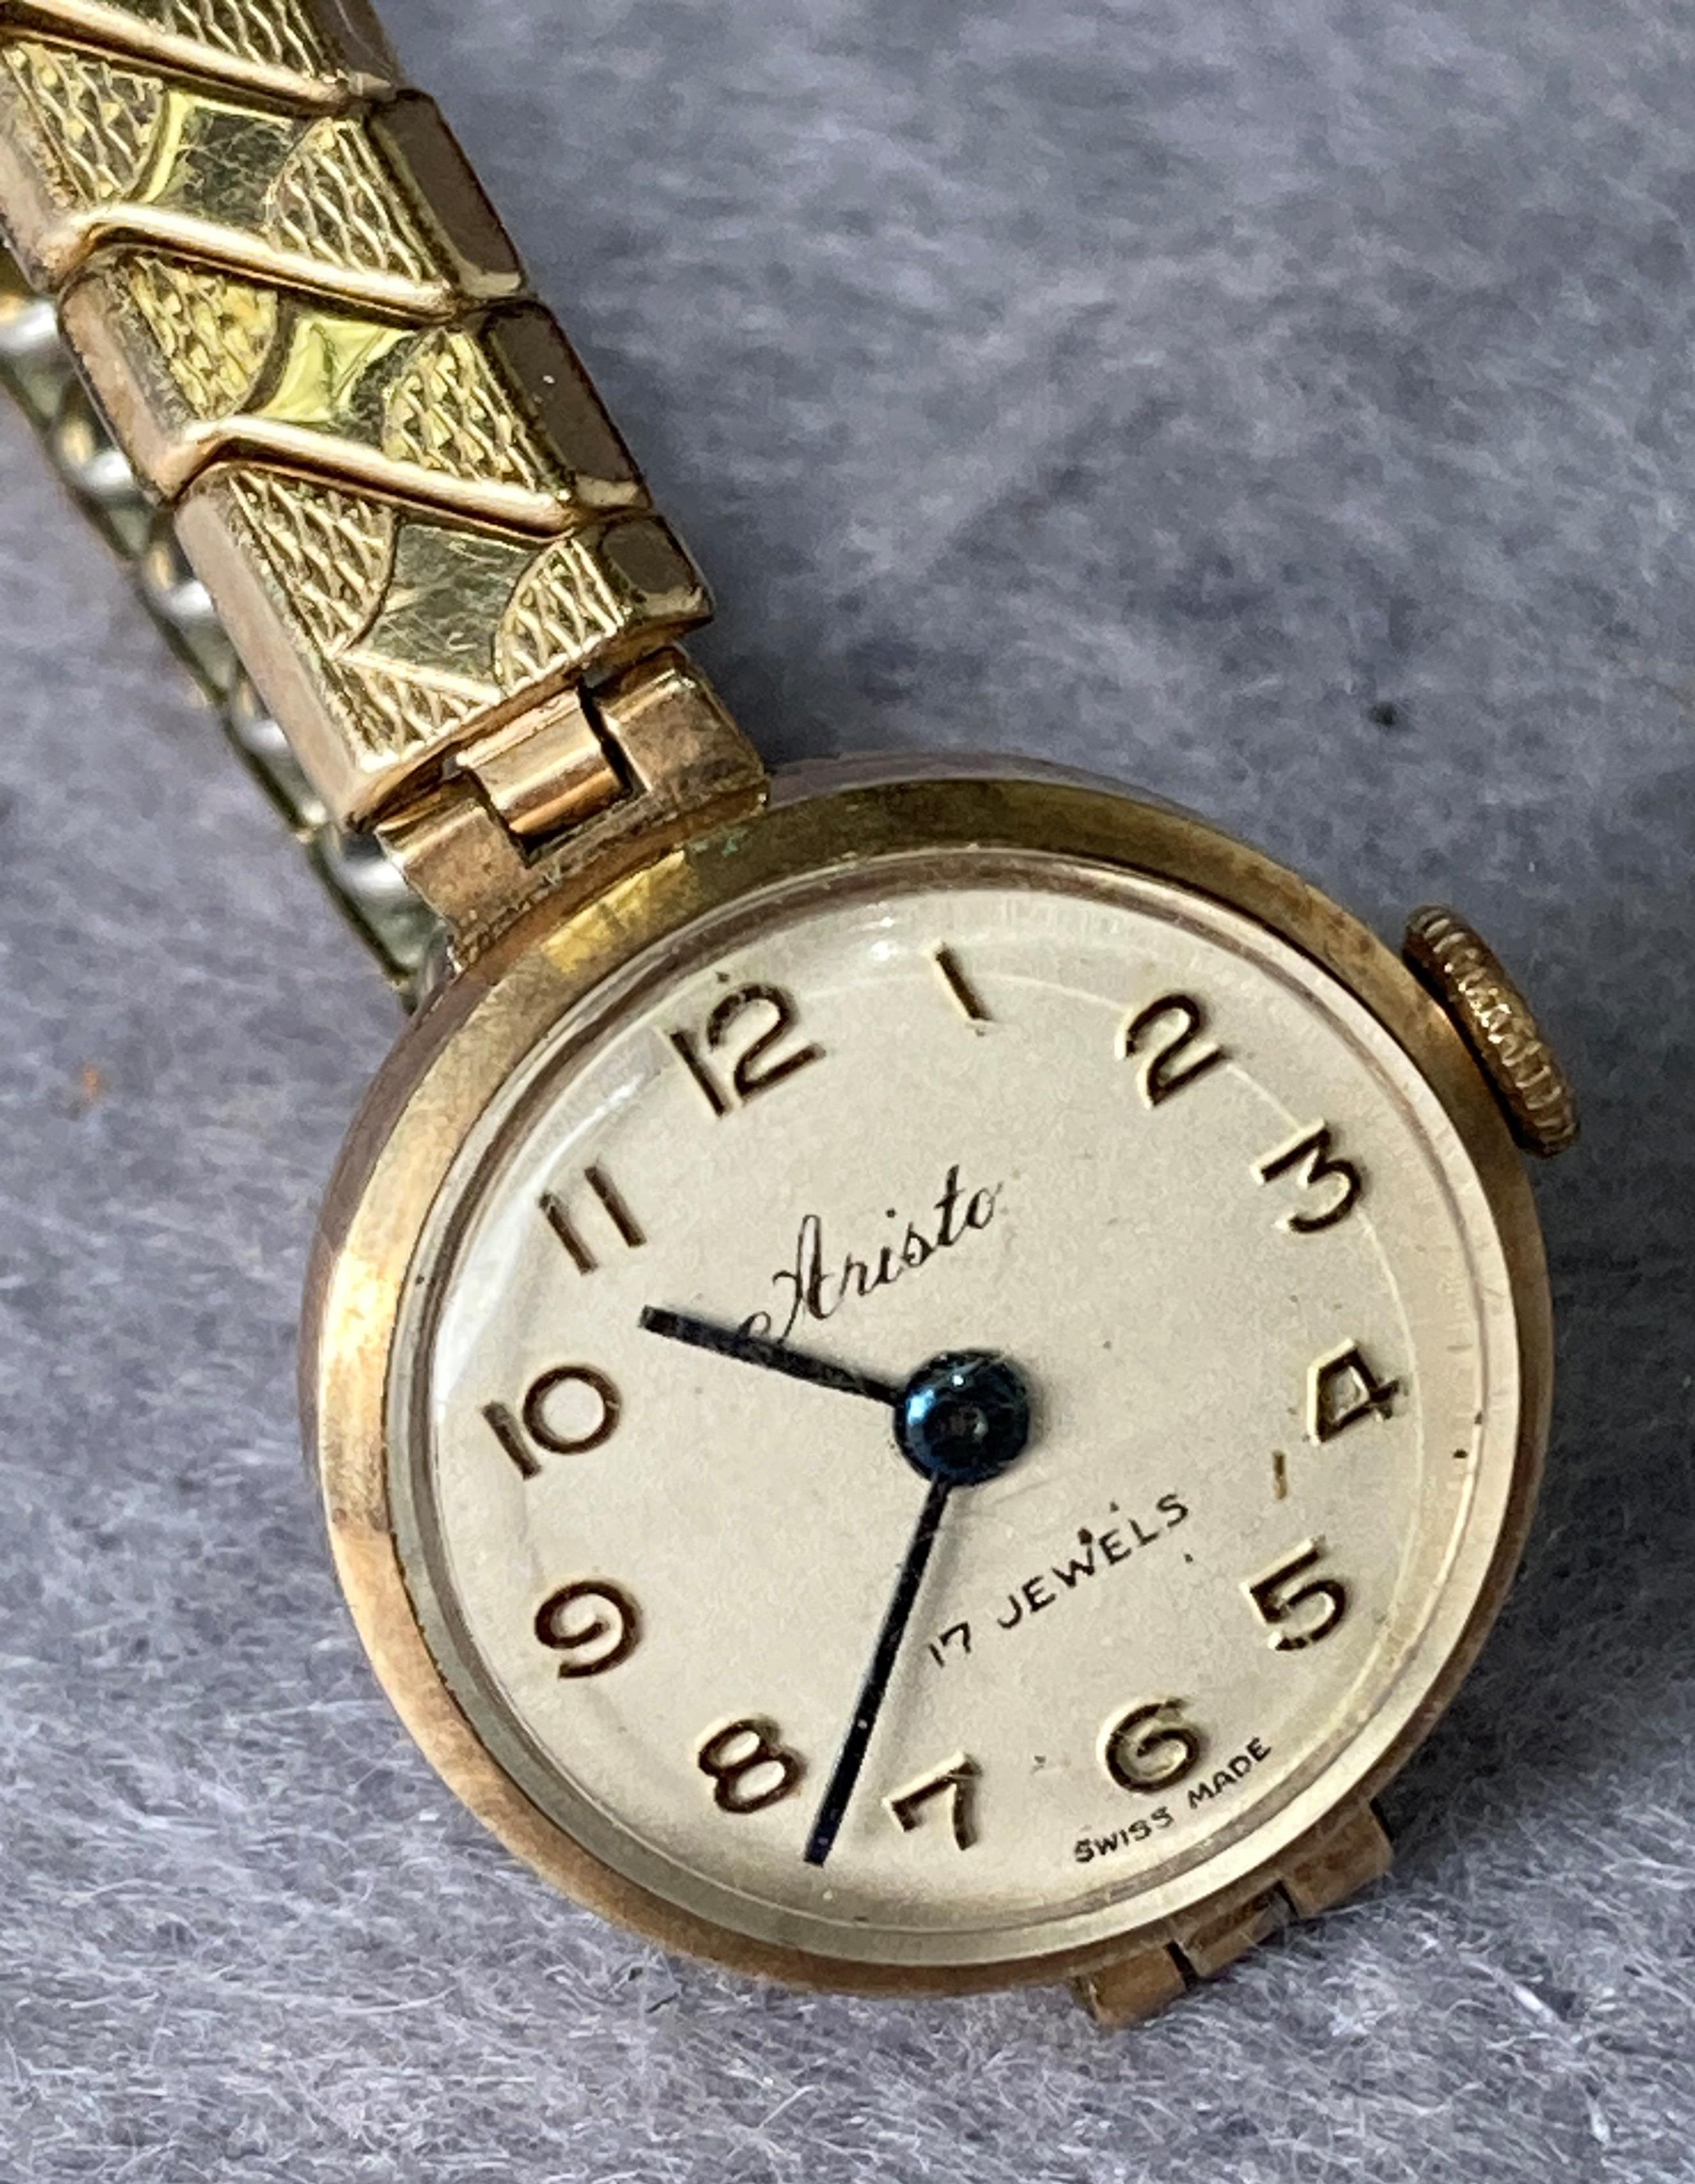 9ct gold (375) Aristo ladies watch with a rolled gold strap (saleroom location: S3 GC6) - Image 3 of 3